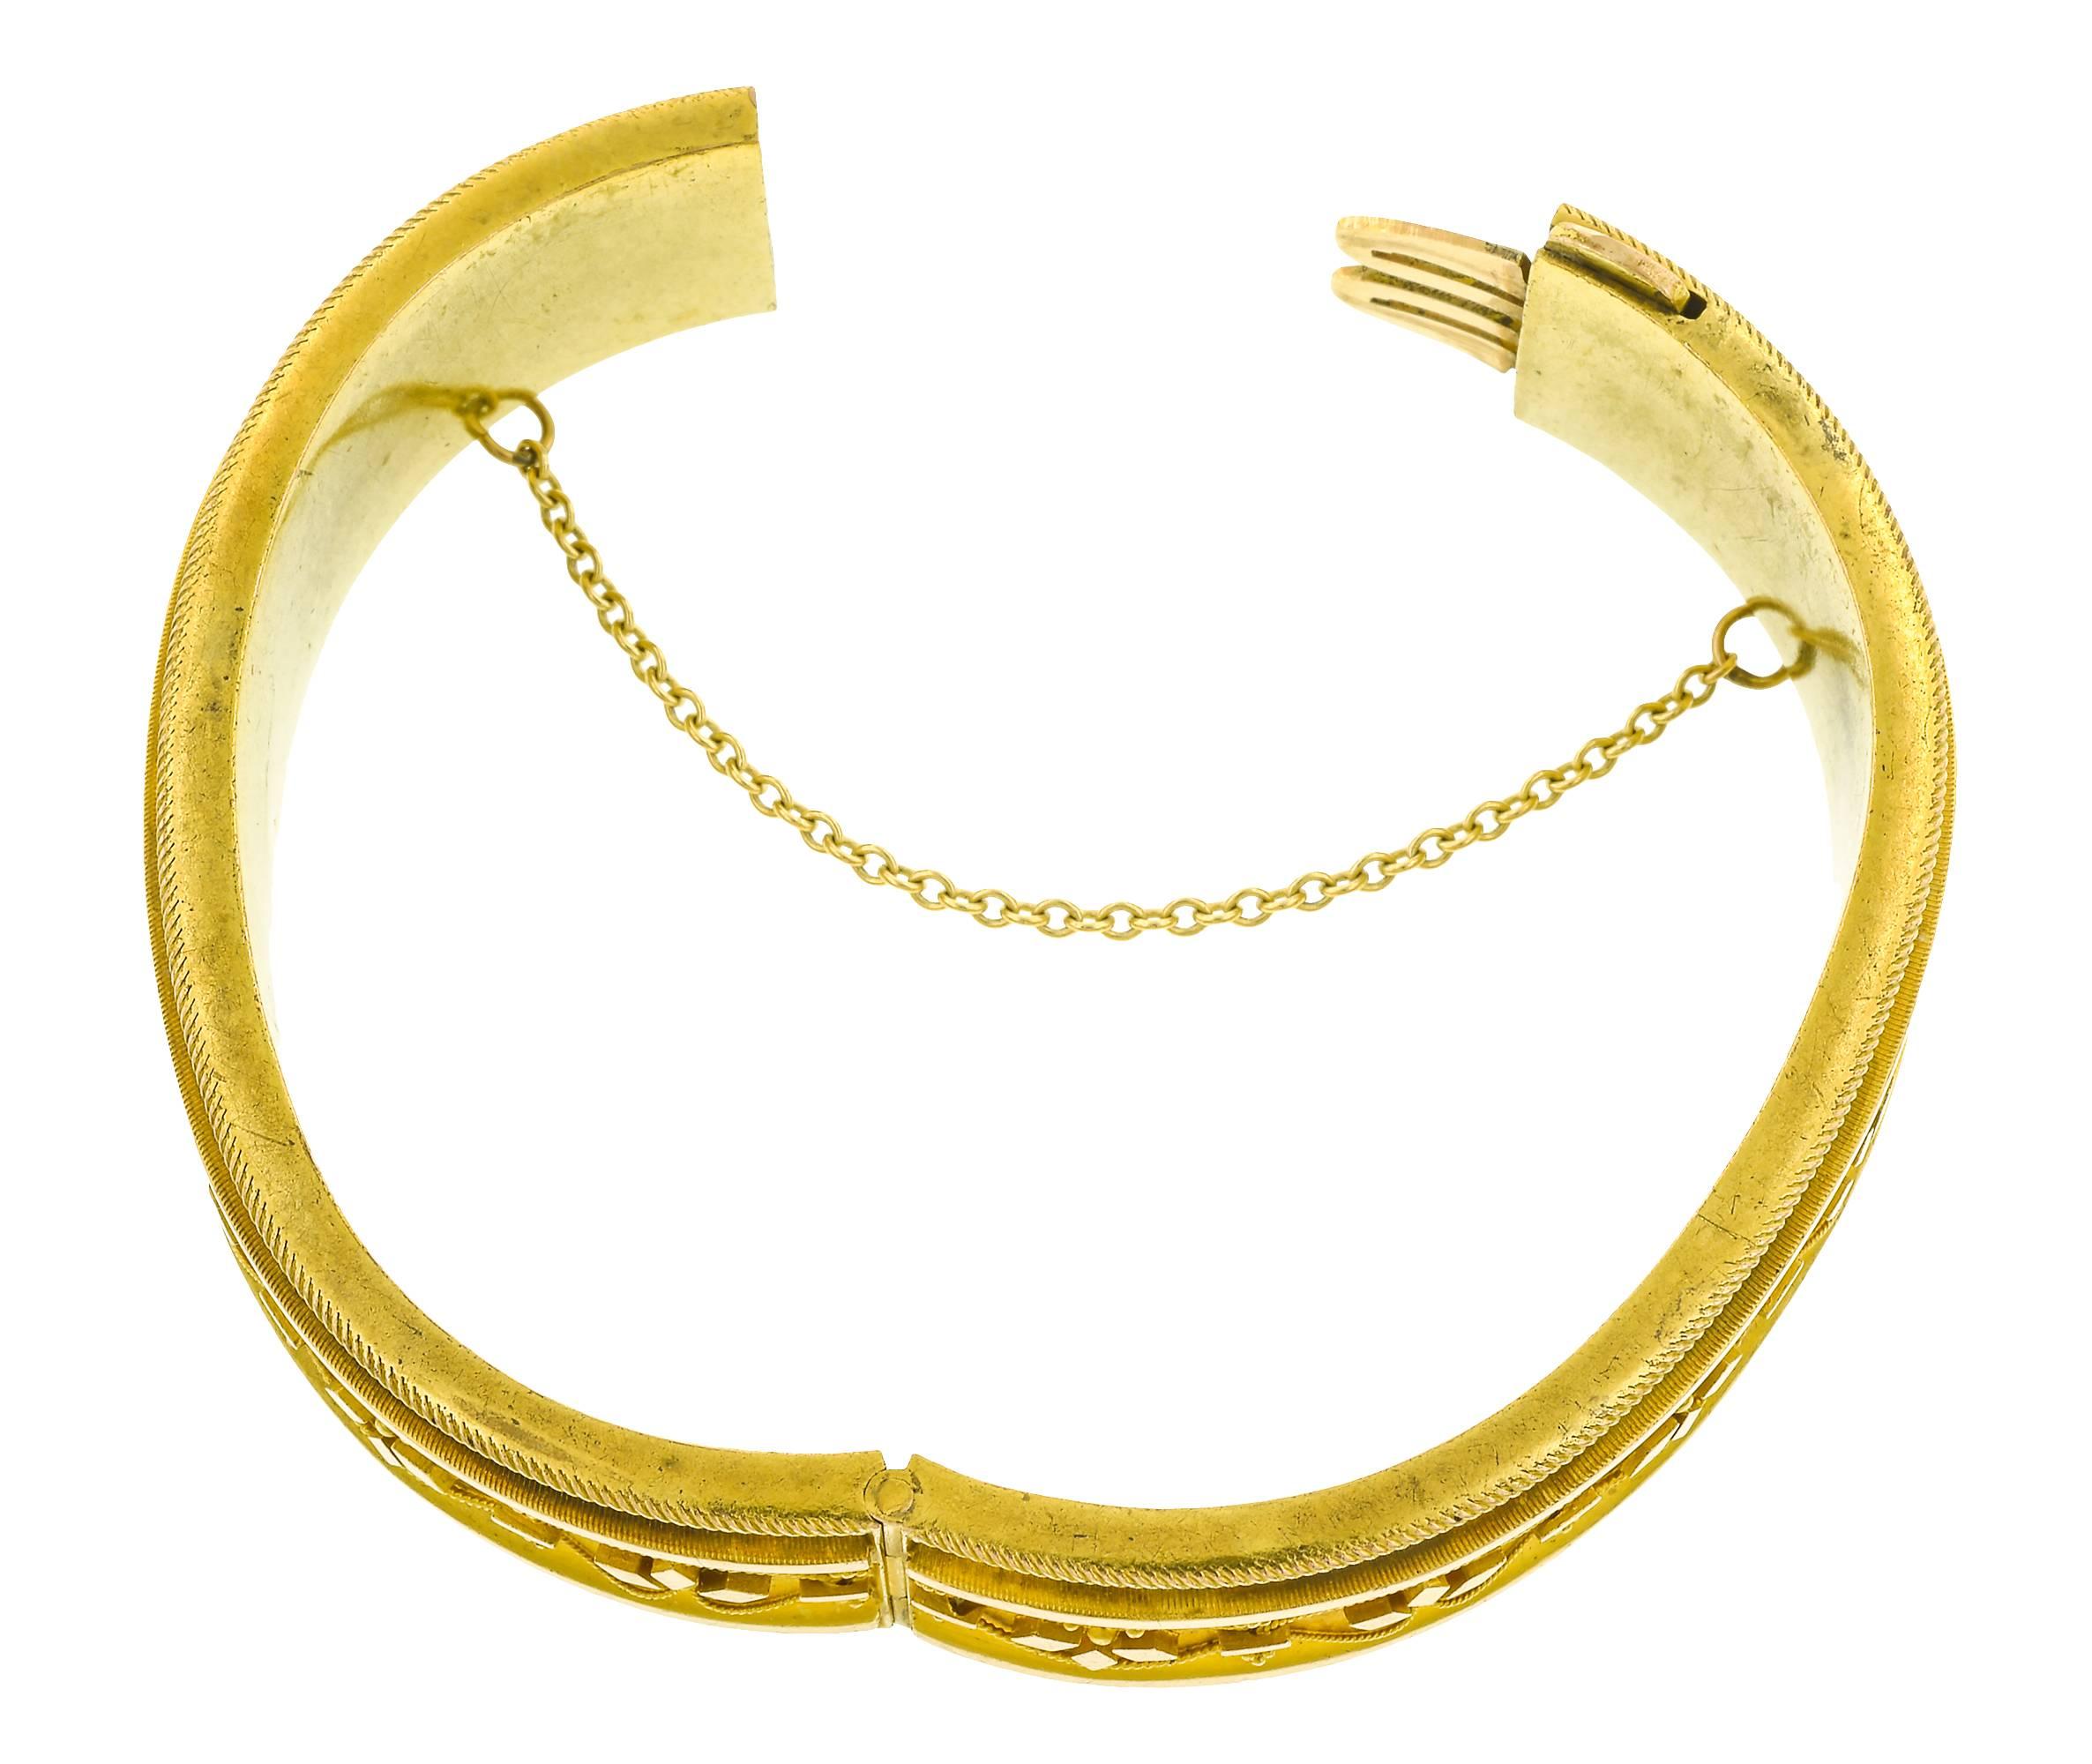 Victorian Etruscan Revival Bangle Bracelet In Good Condition For Sale In New York, NY